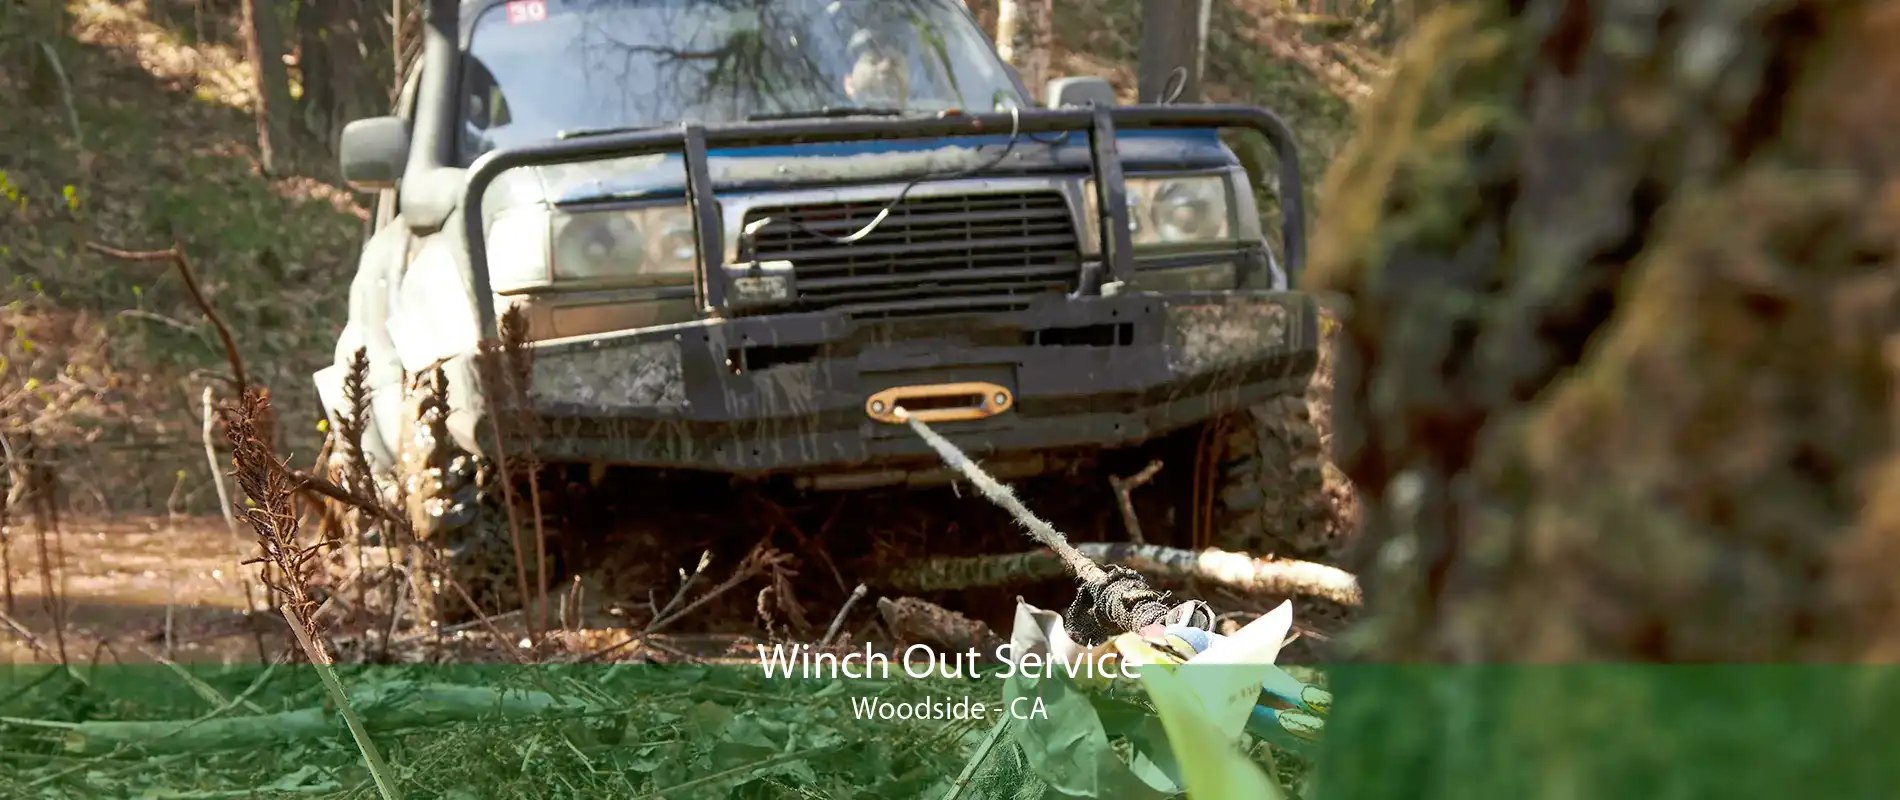 Winch Out Service Woodside - CA